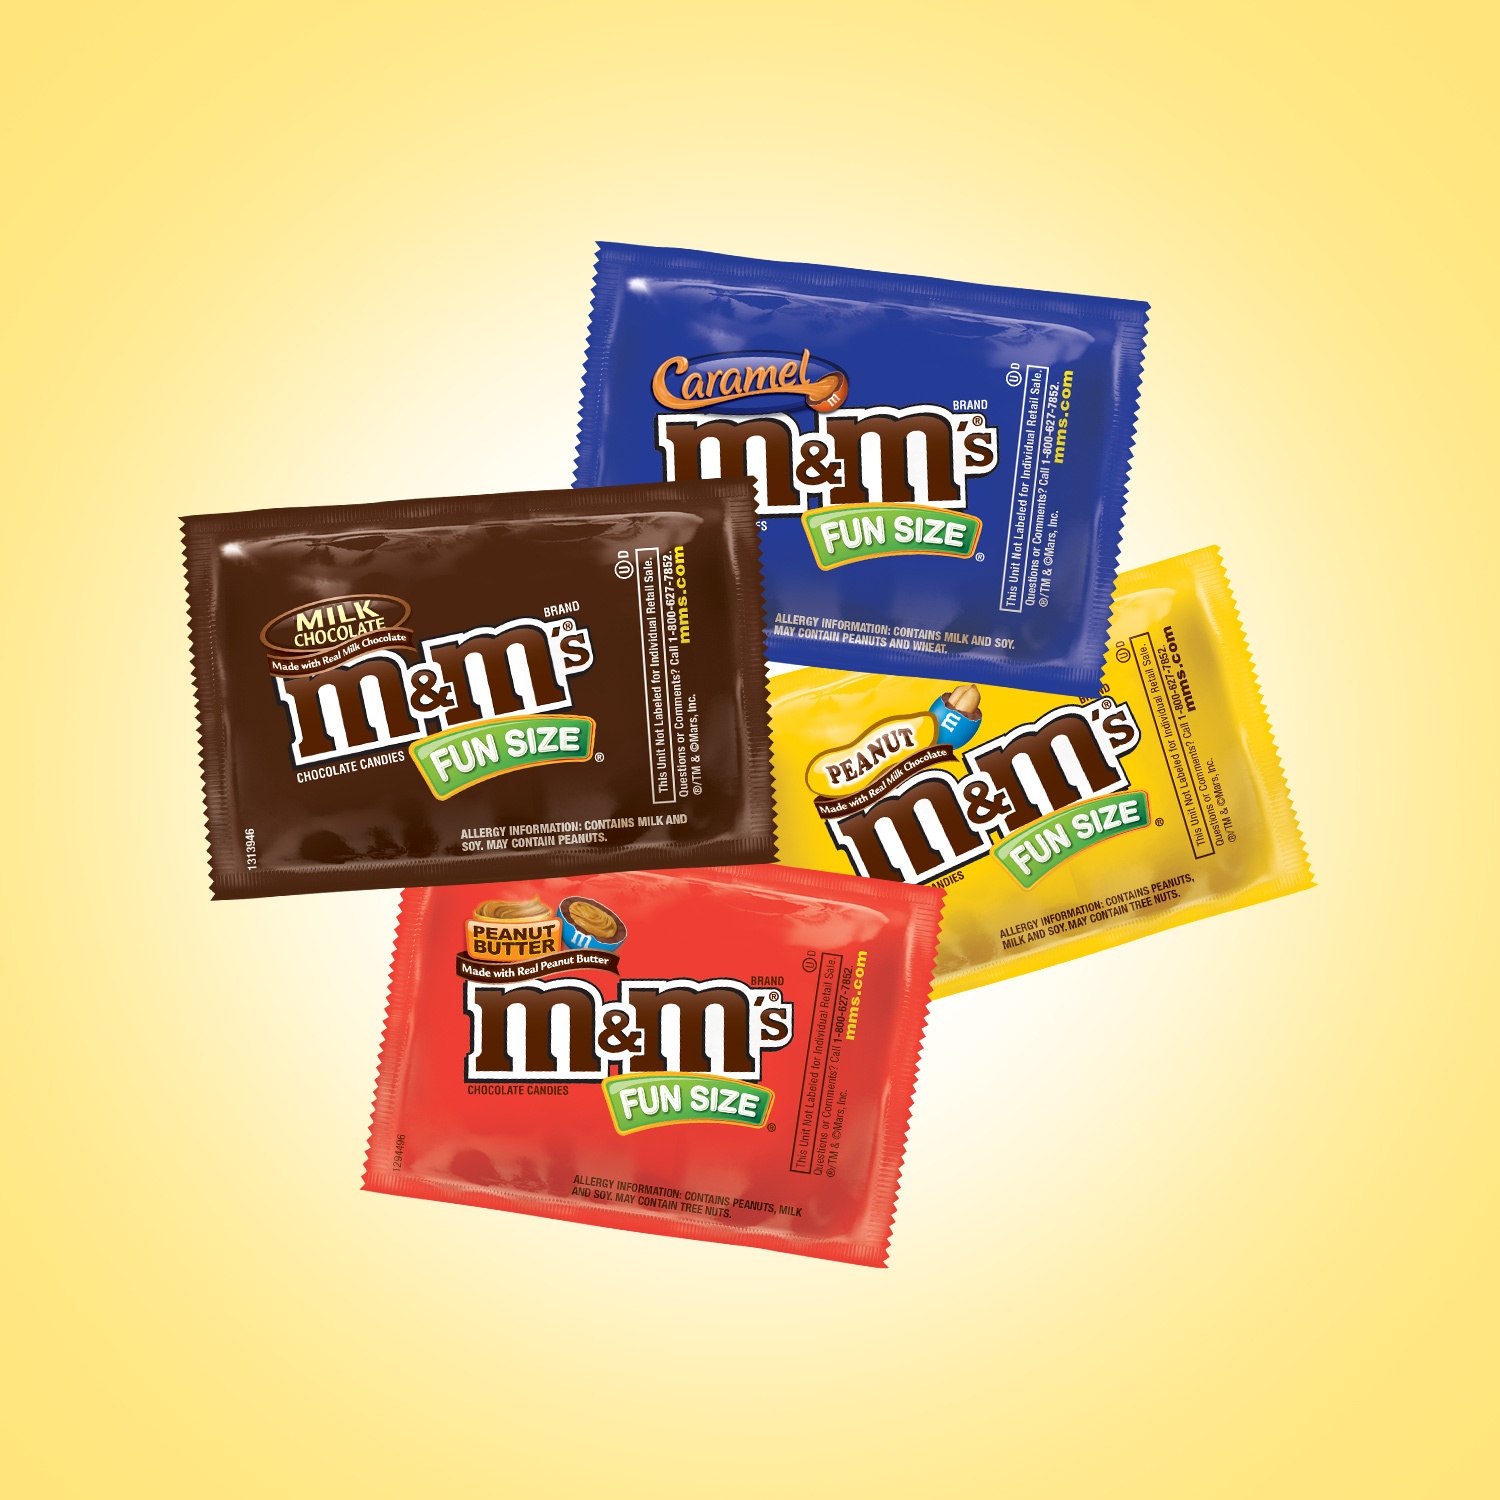 M&M'S Variety Pack Full Size Milk Chocolate Candy Bars Assortment